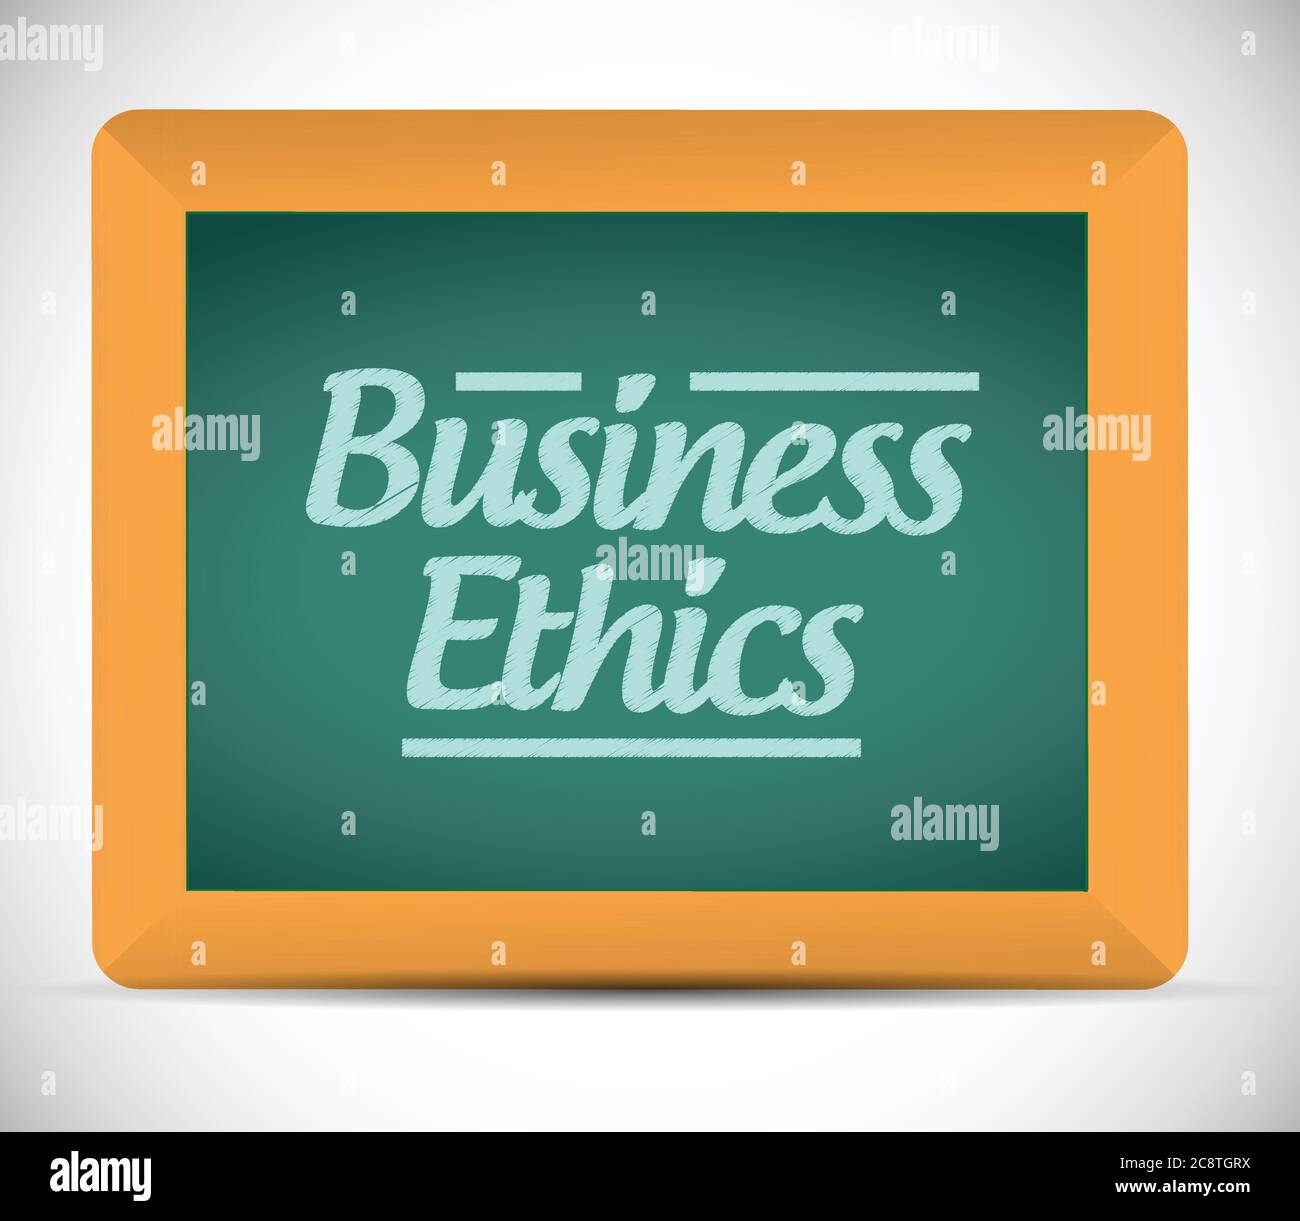 Business ethics message illustration design over a white background Stock Vector